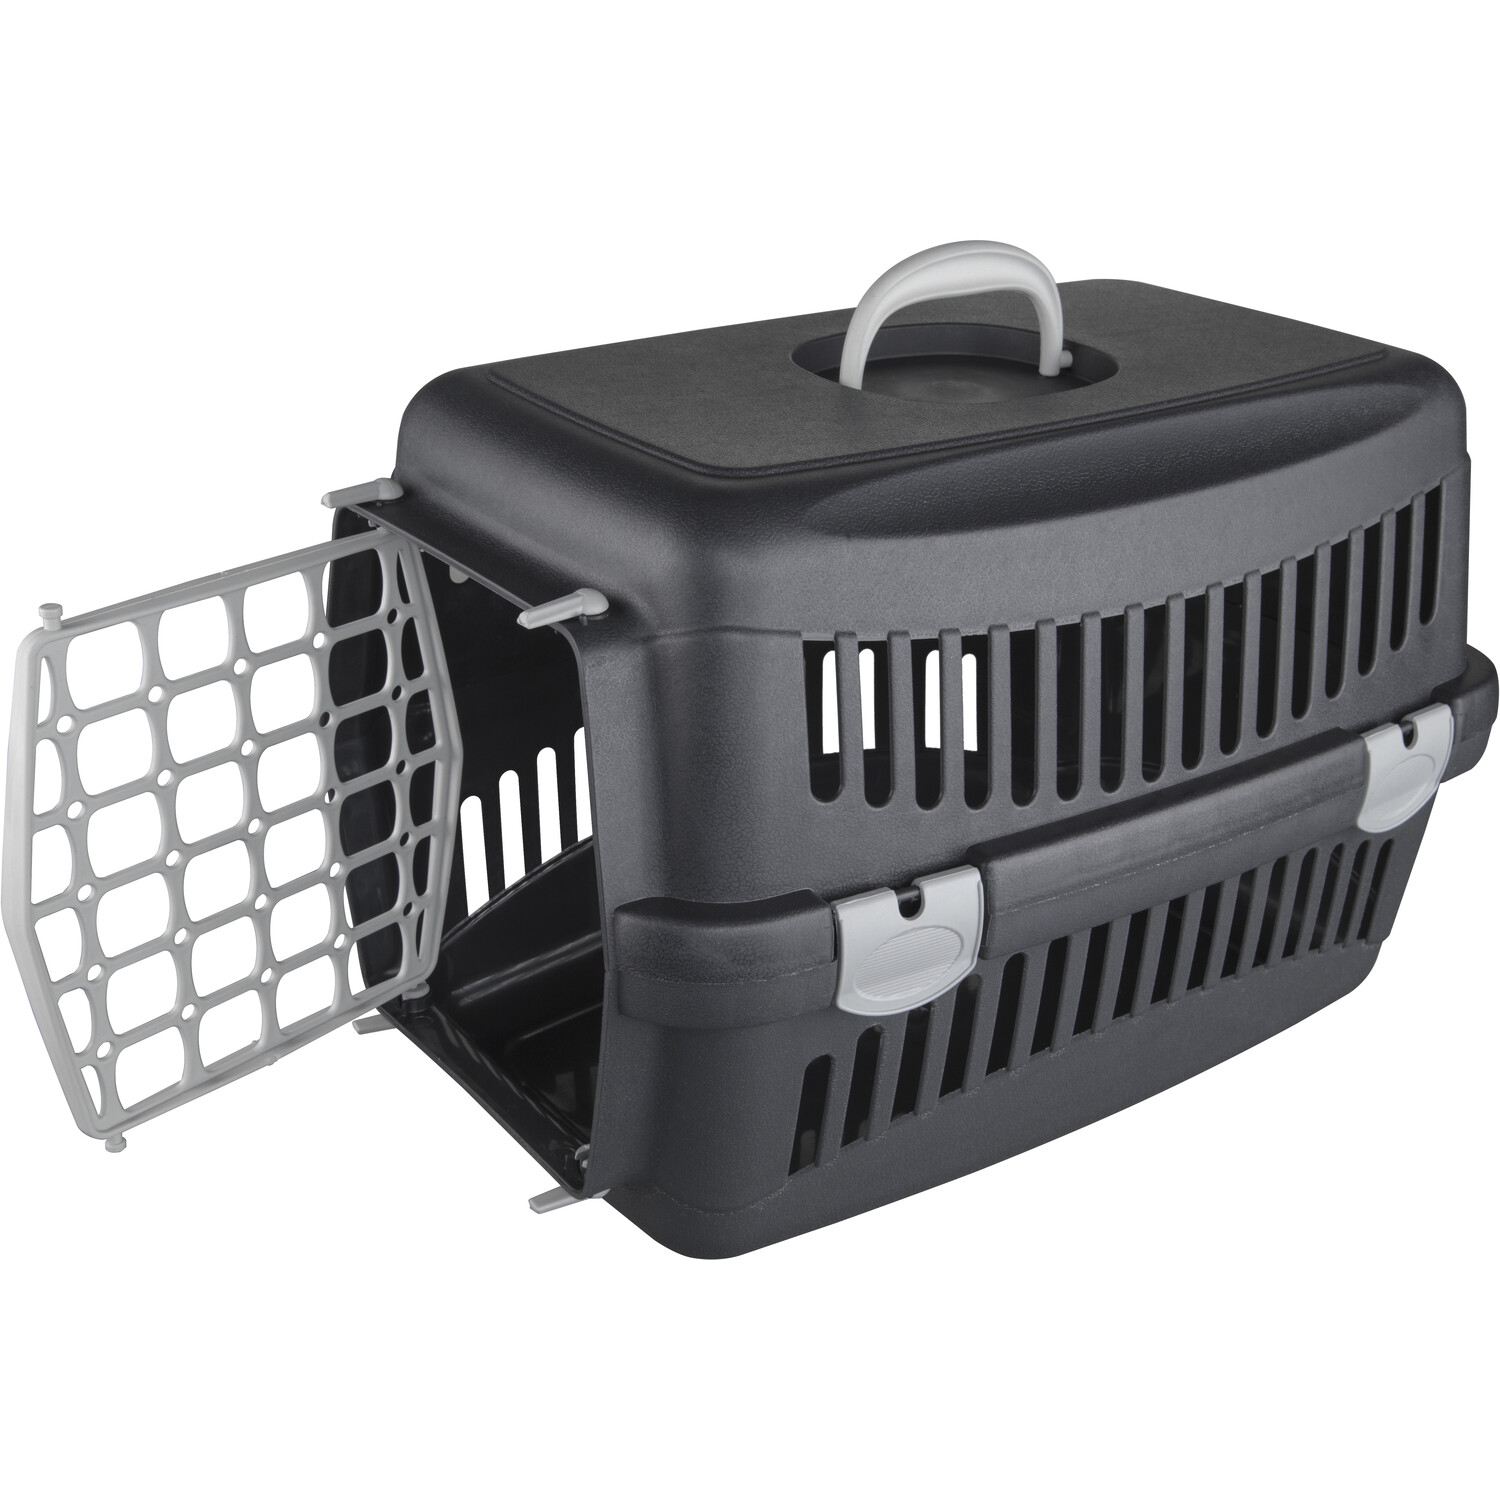 Small Travel Pet Carrier Image 2